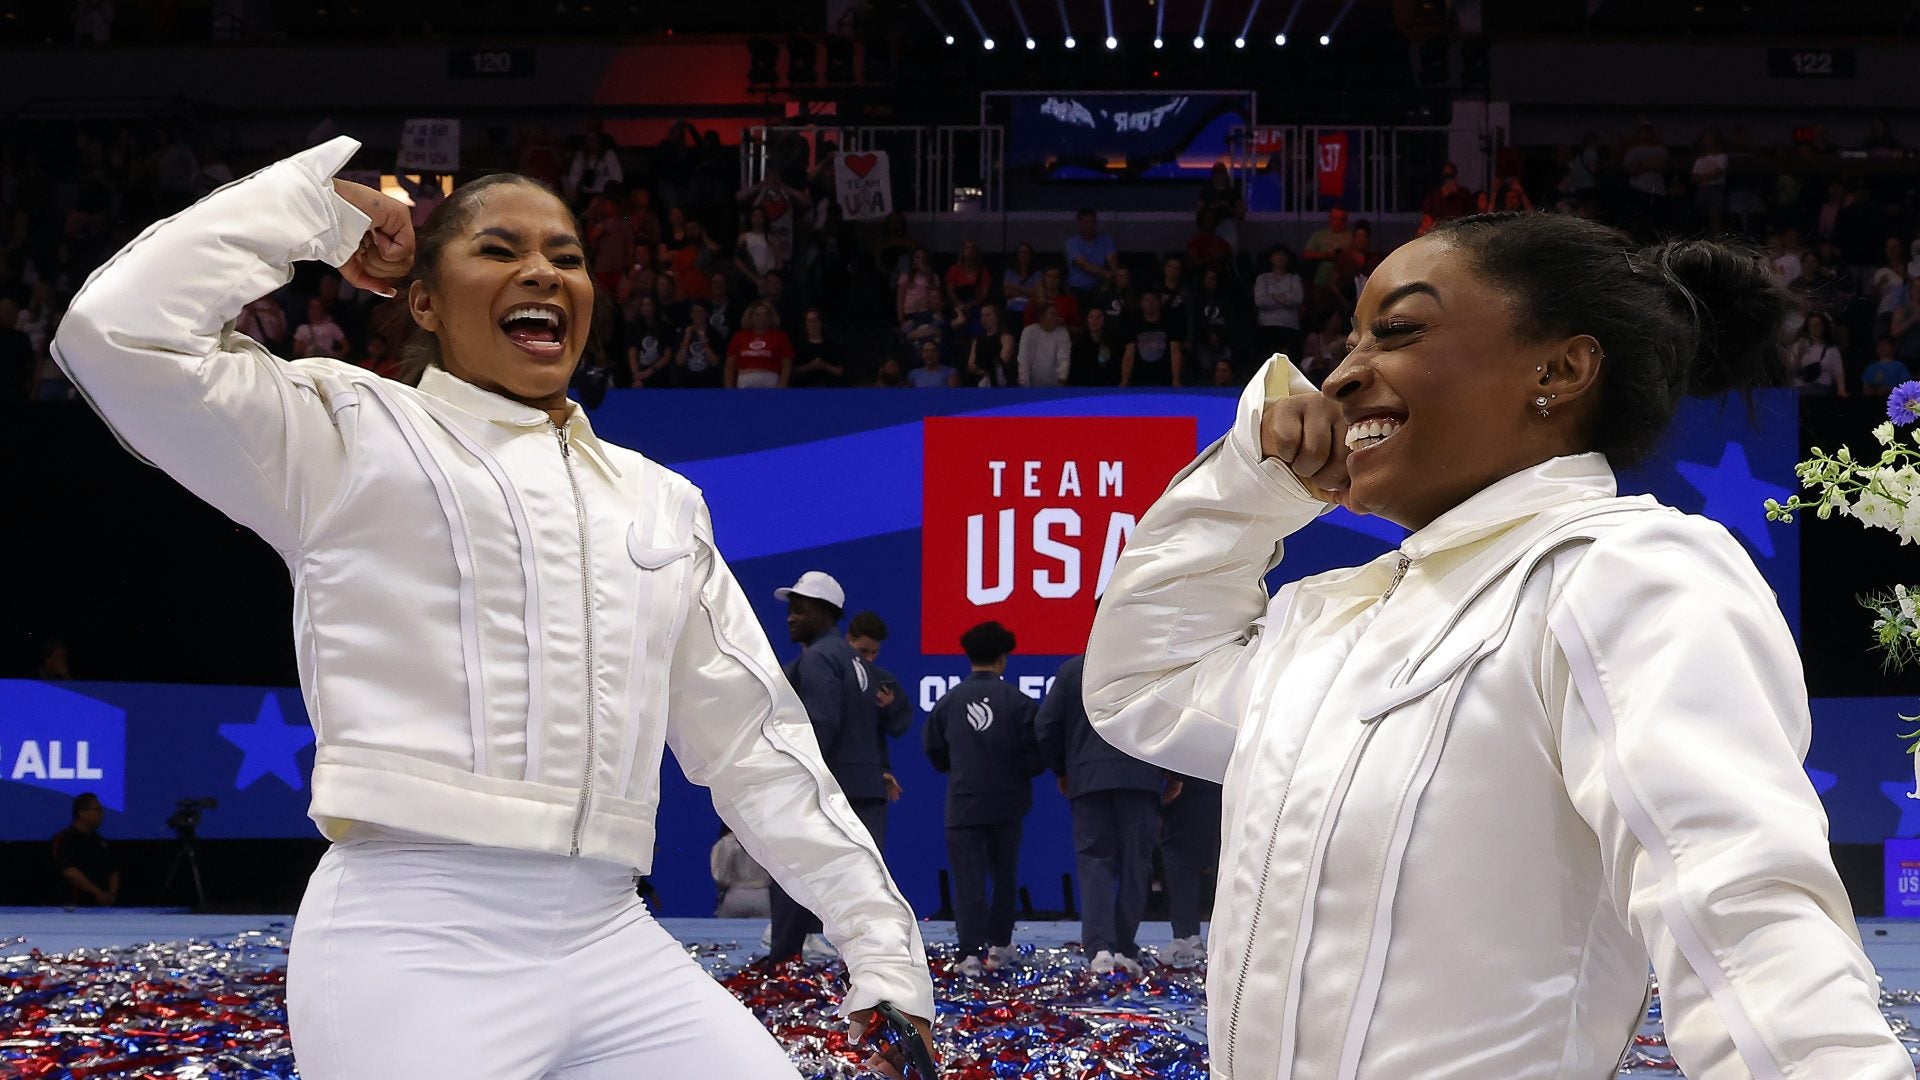 Black Girl Magic Reigned Supreme at the 2024 US Gymnastics Olympic Team Trials